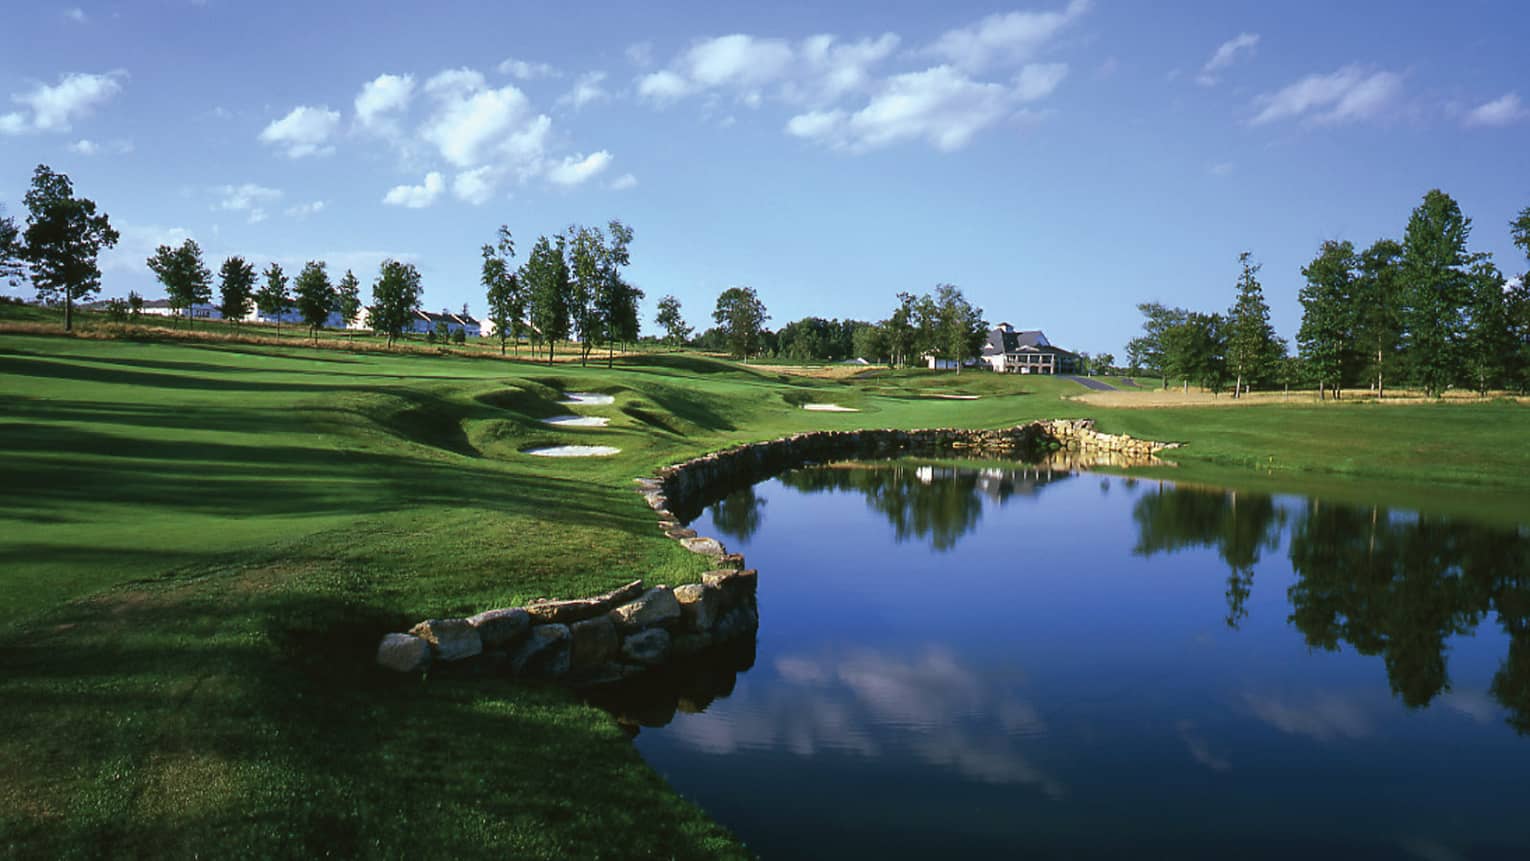 Pond in front of rolling golf course greens under blue sky